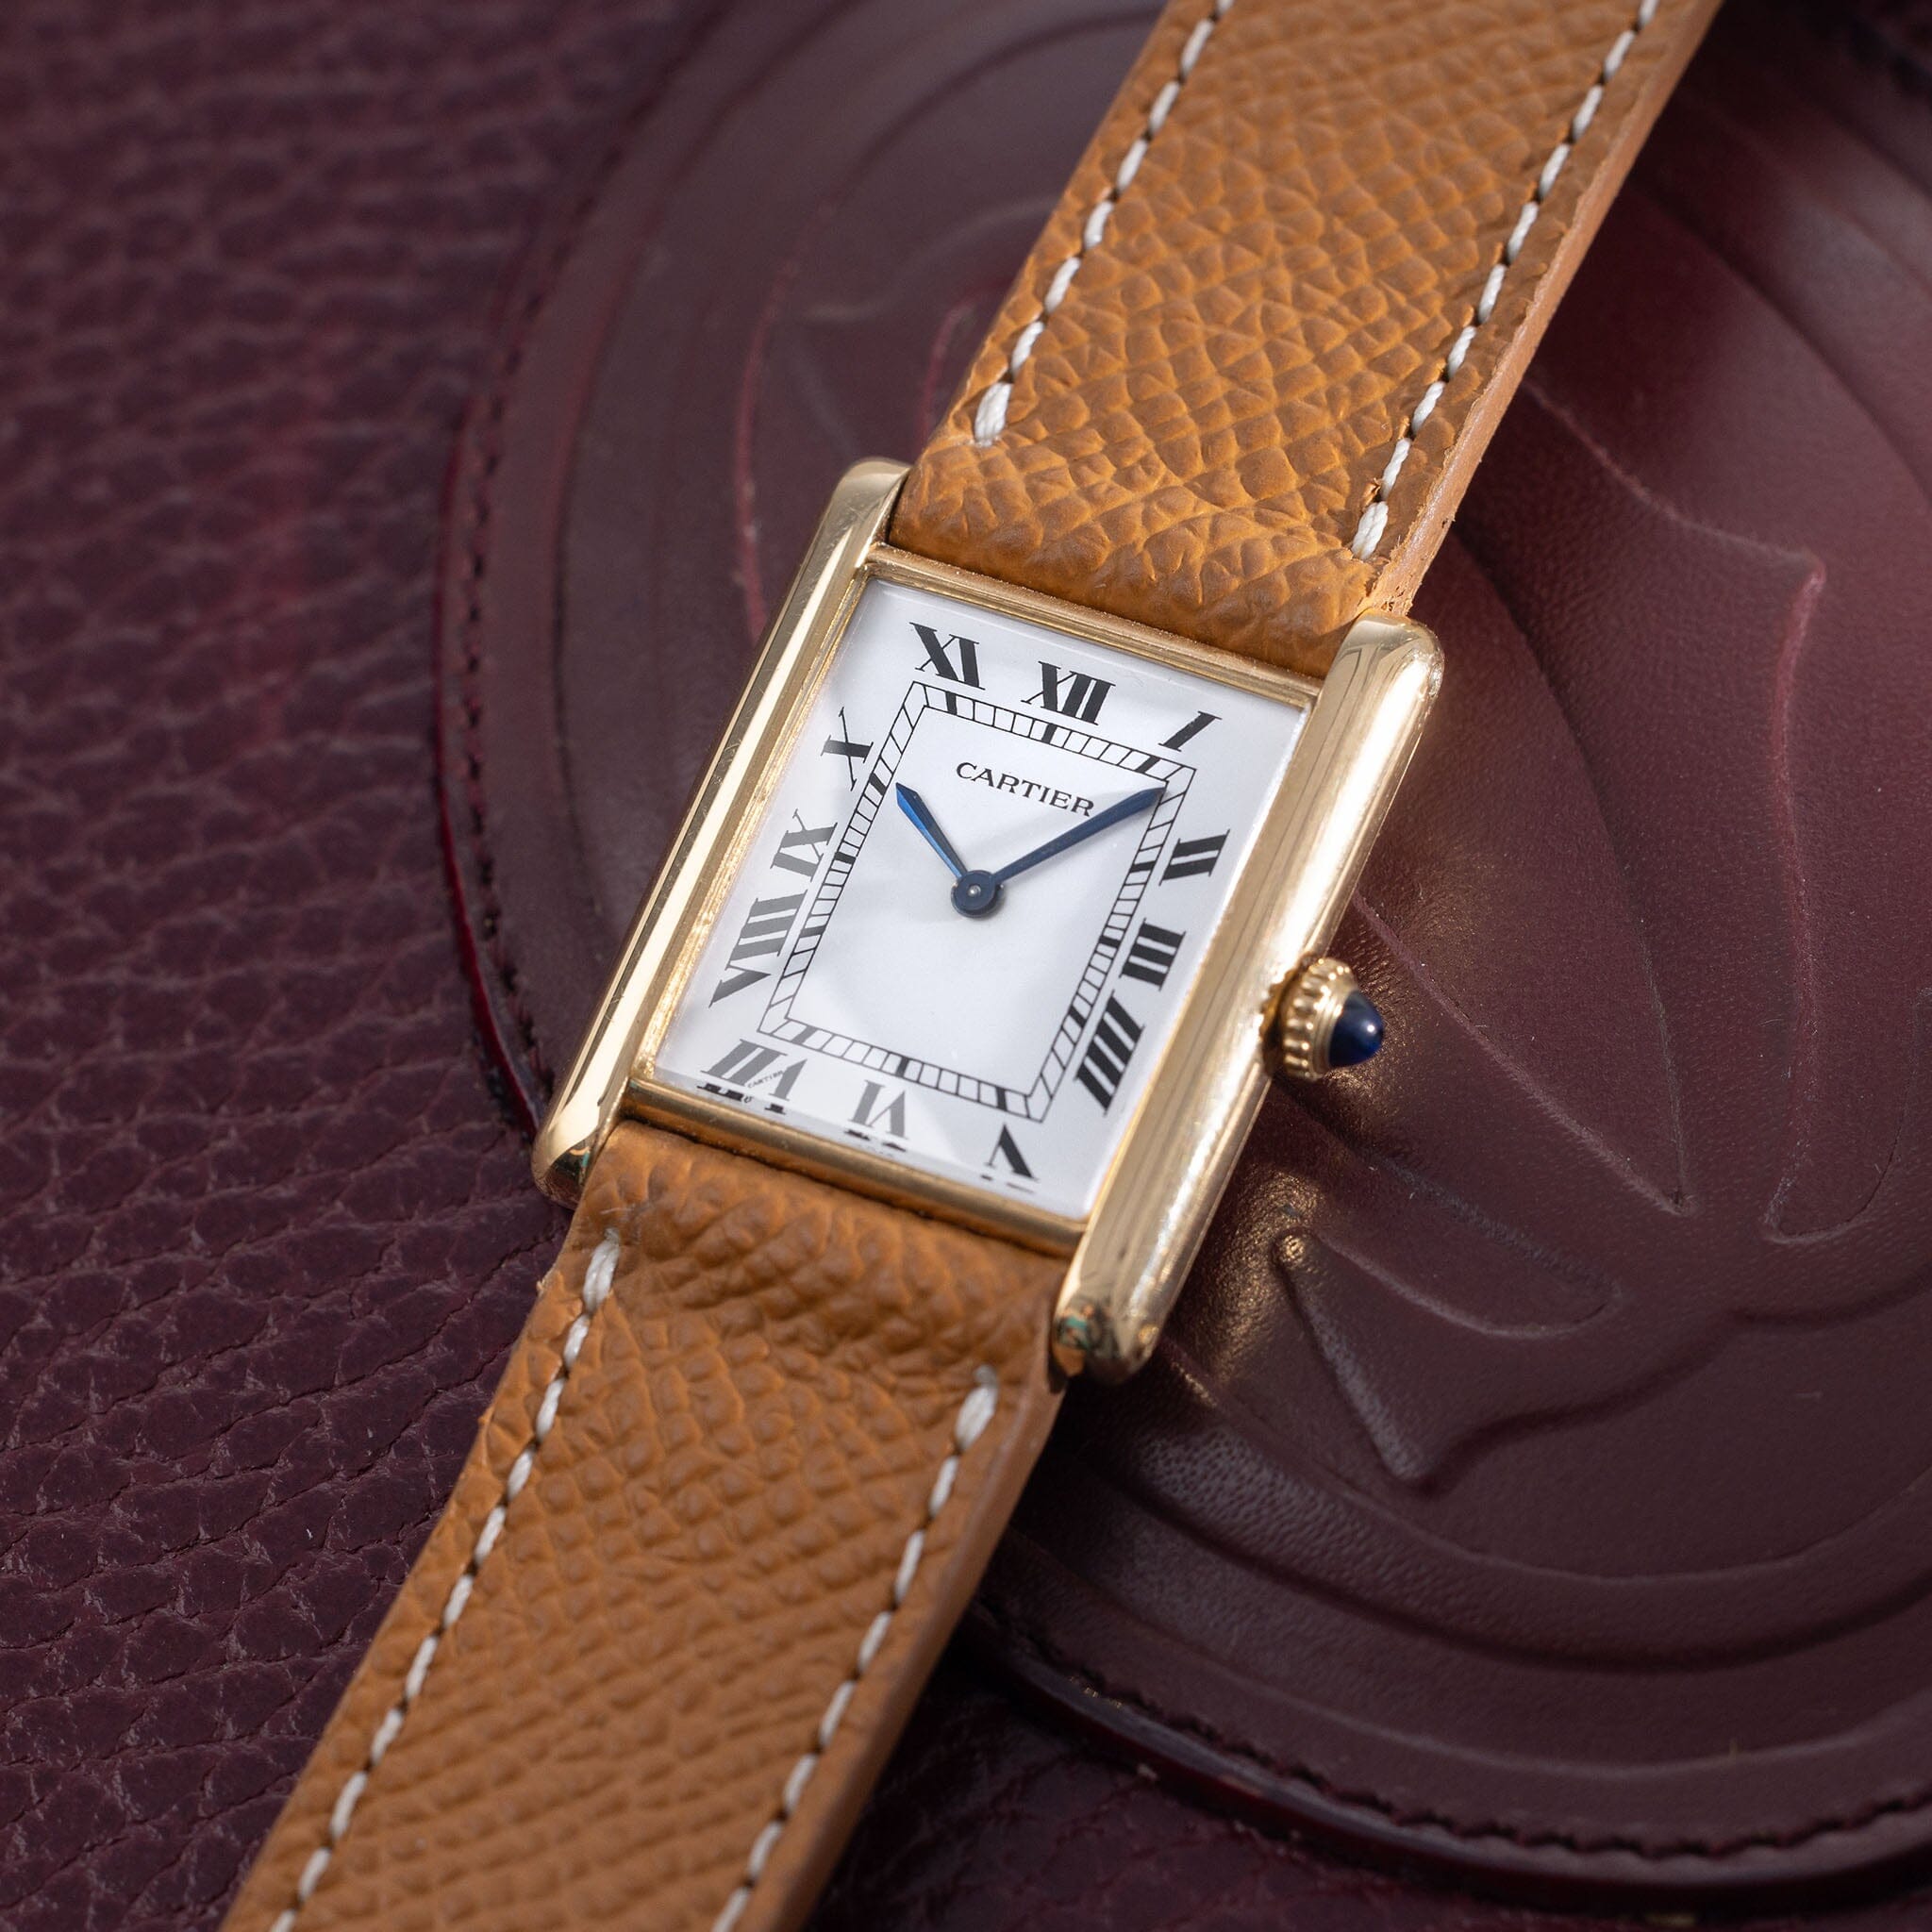 Cartier - Hands on review of the Louis Cartier extra-flat